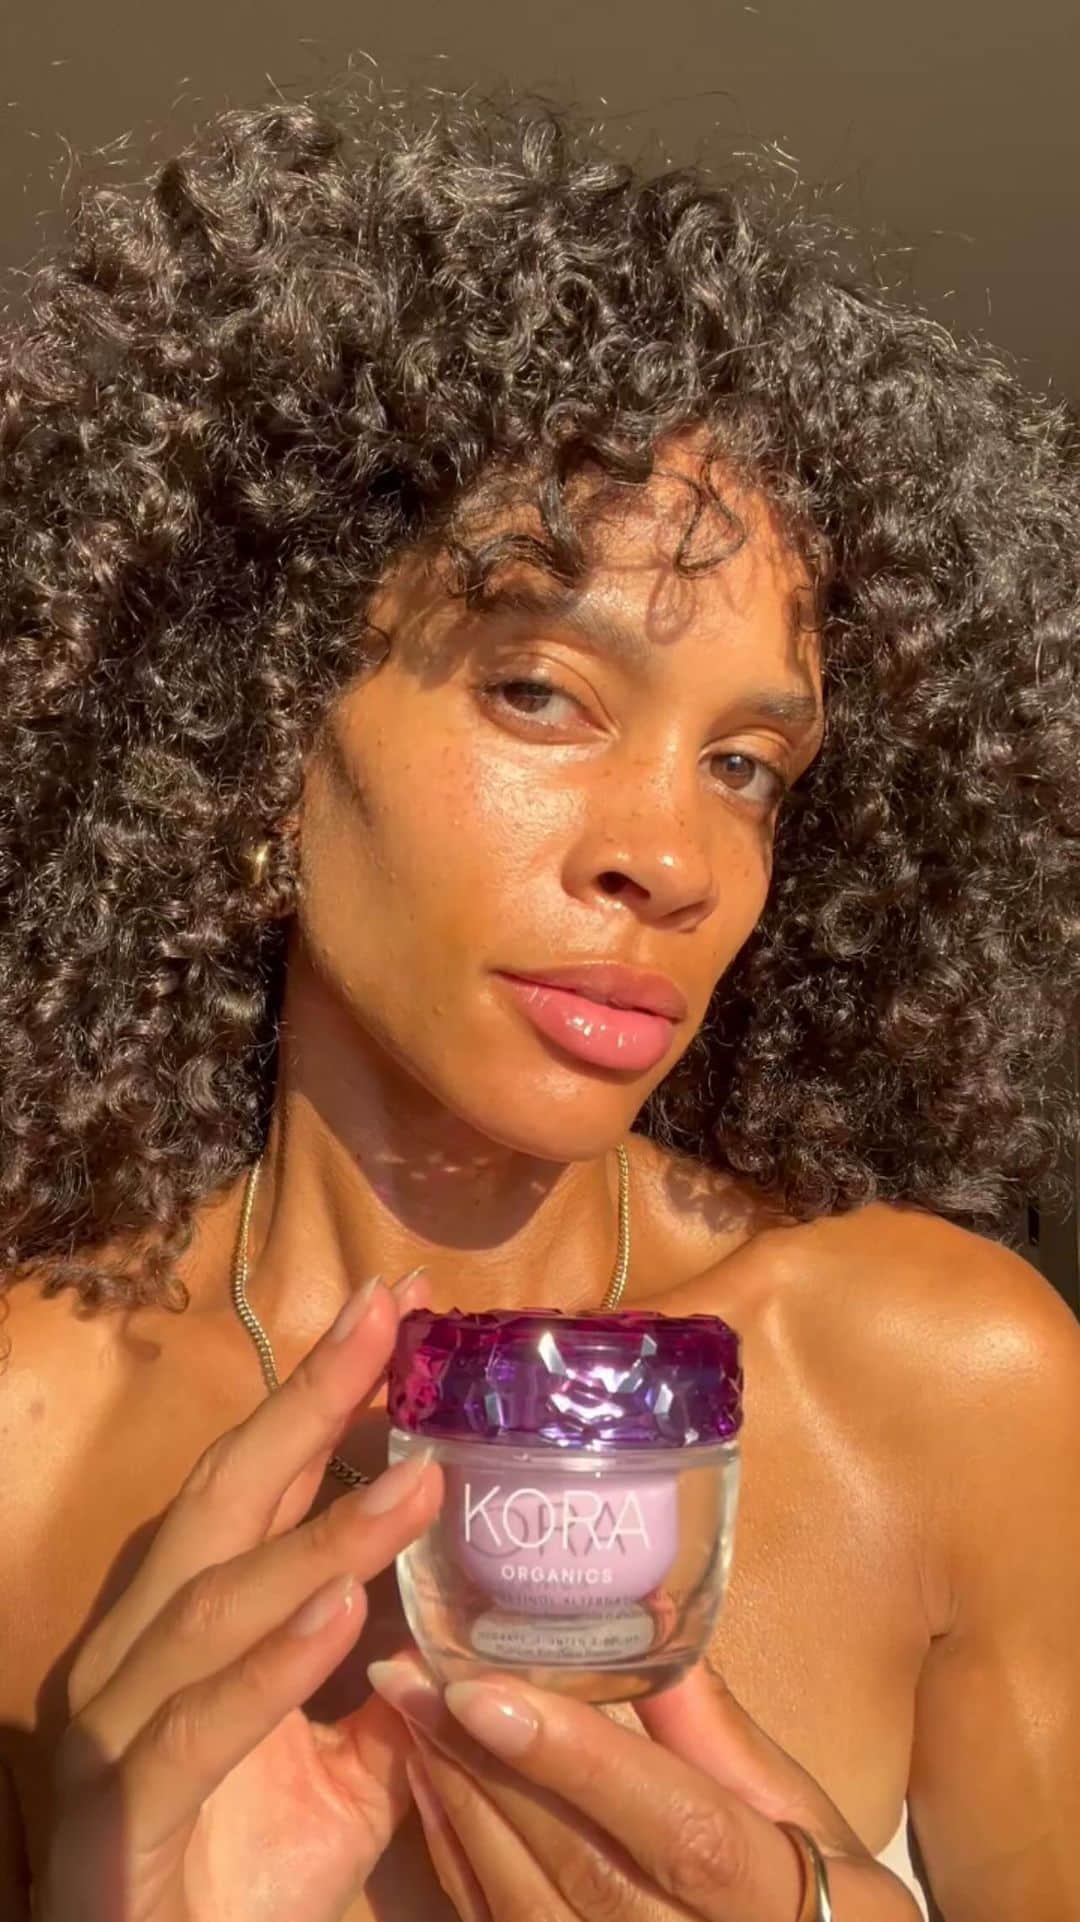 KORA Organicsのインスタグラム：「@britt.hume’s honest thoughts on our new moisturizer 💜  “The Plant Stem Cell Retinol Alternative Moisturizer is lovely! I’ve been using it, morning and night, for about a month now and my skin is happy and nourished. The fine lines around my eyes, mouth and neck have lessened and the overall texture of my skin feels firmer.   I have psoriasis on my scalp, ears and neck so I have to be careful with my skincare selections. This moisturizer is super gentle and I’ve had no flare ups or irritations - just youthful, glowing skin! Another favorite from Kora Organics!” ✨」